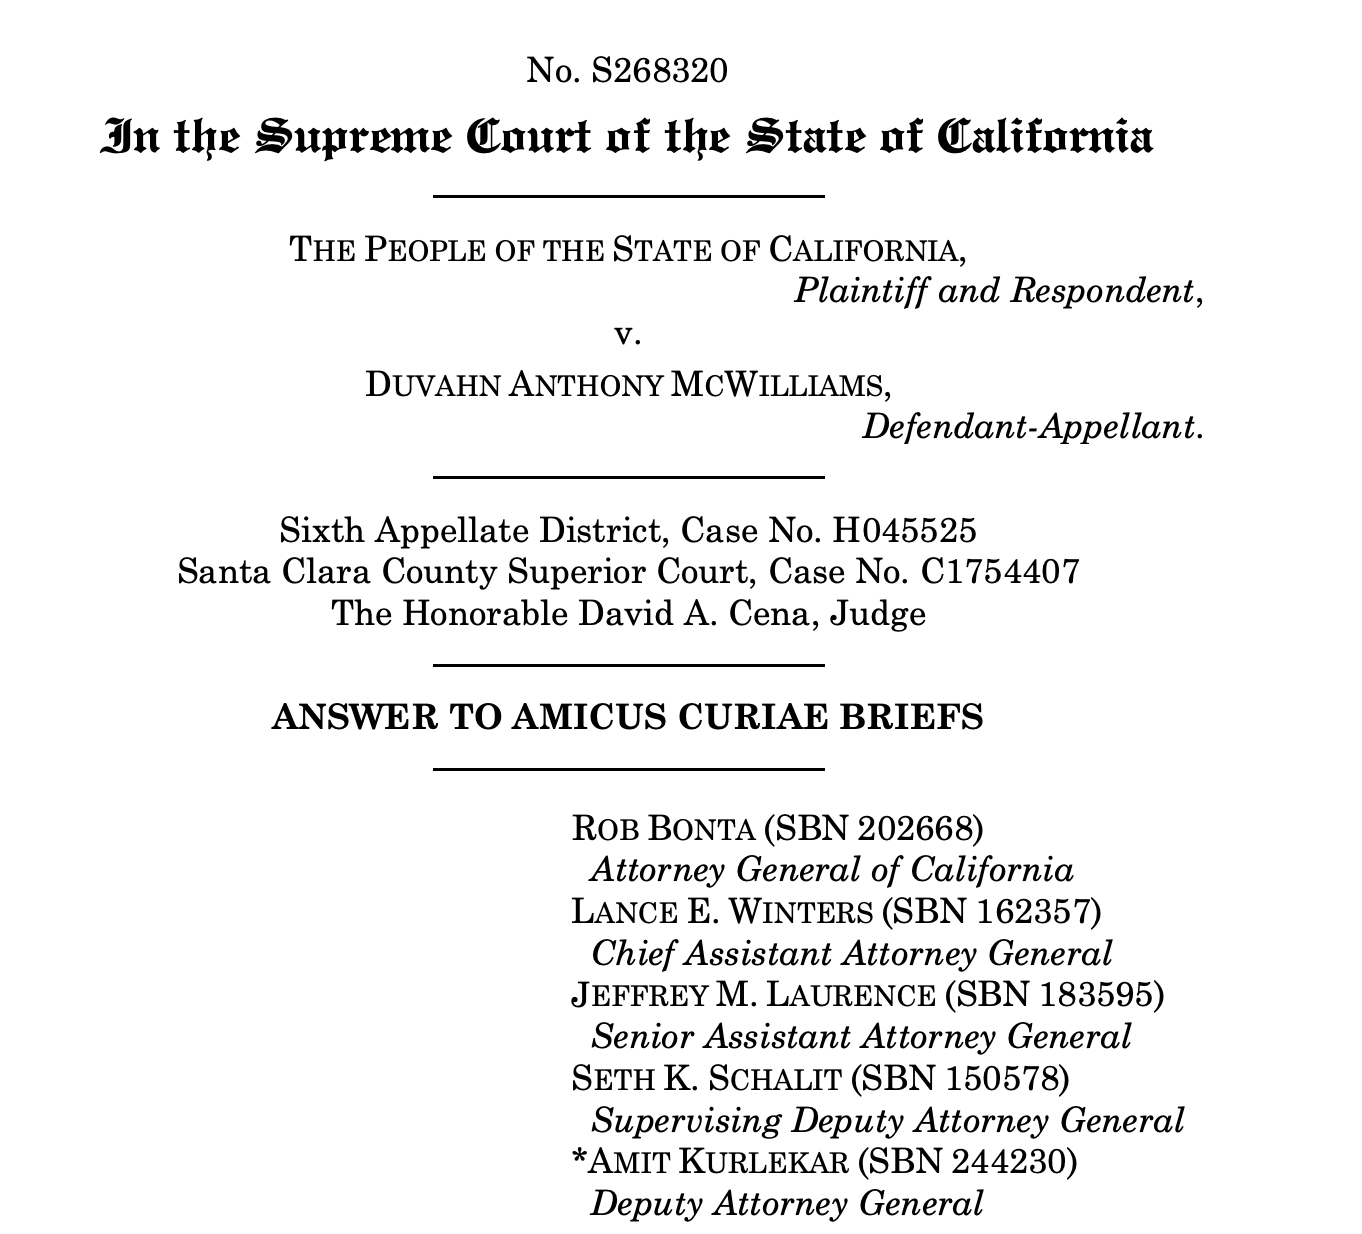 In the Supreme Cmurt of the State at California
THE PEOPLE OF THE STATE OF CALIFORNIA,
Plaintiff and Respondent,
V.
DUVAHN ANTHONY MCWILLIAMS, Defendant-Appellant.

Sixth Appellate District, Case No. H045525
Santa Clara County Superior Court, Case No. C1754407
The Honorable David A. Cena, Judge
ANSWER TO AMICUS CURIAE BRIEFS
ROB BONTA (SBN 202668)
Attorney General of California
LANCE E. WINTERS (SBN 162357)
Chief Assistant Attorney General
JEFFREY M. LAURENCE (SBN 183595)
Senior Assistant Attorney General
SETH K. SCHALIT (SBN 150578)
Supervising Deputy Attorney General
*AMIT KURLEKAR (SBN 244230)
Deputy Attorney General}
